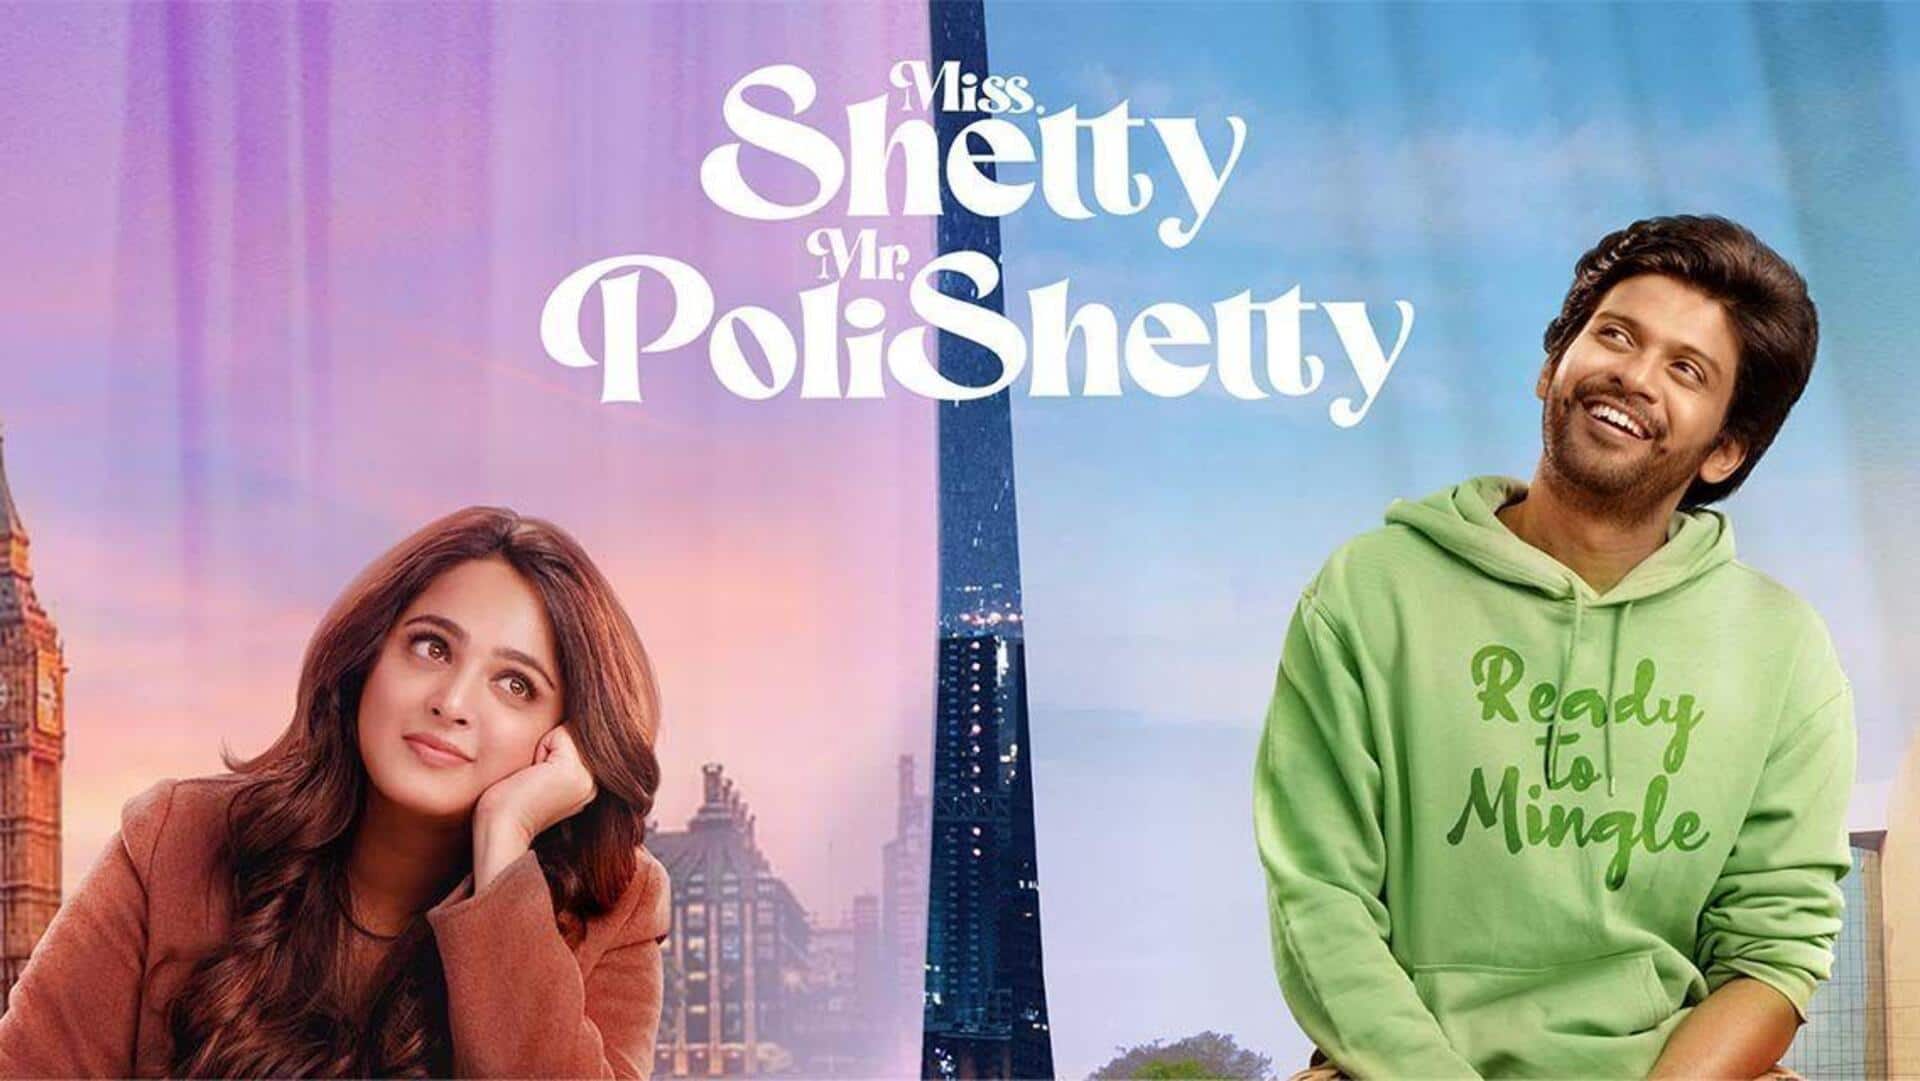 Box office collection: 'Miss Shetty Mr. Polishetty' crosses Rs. 11cr